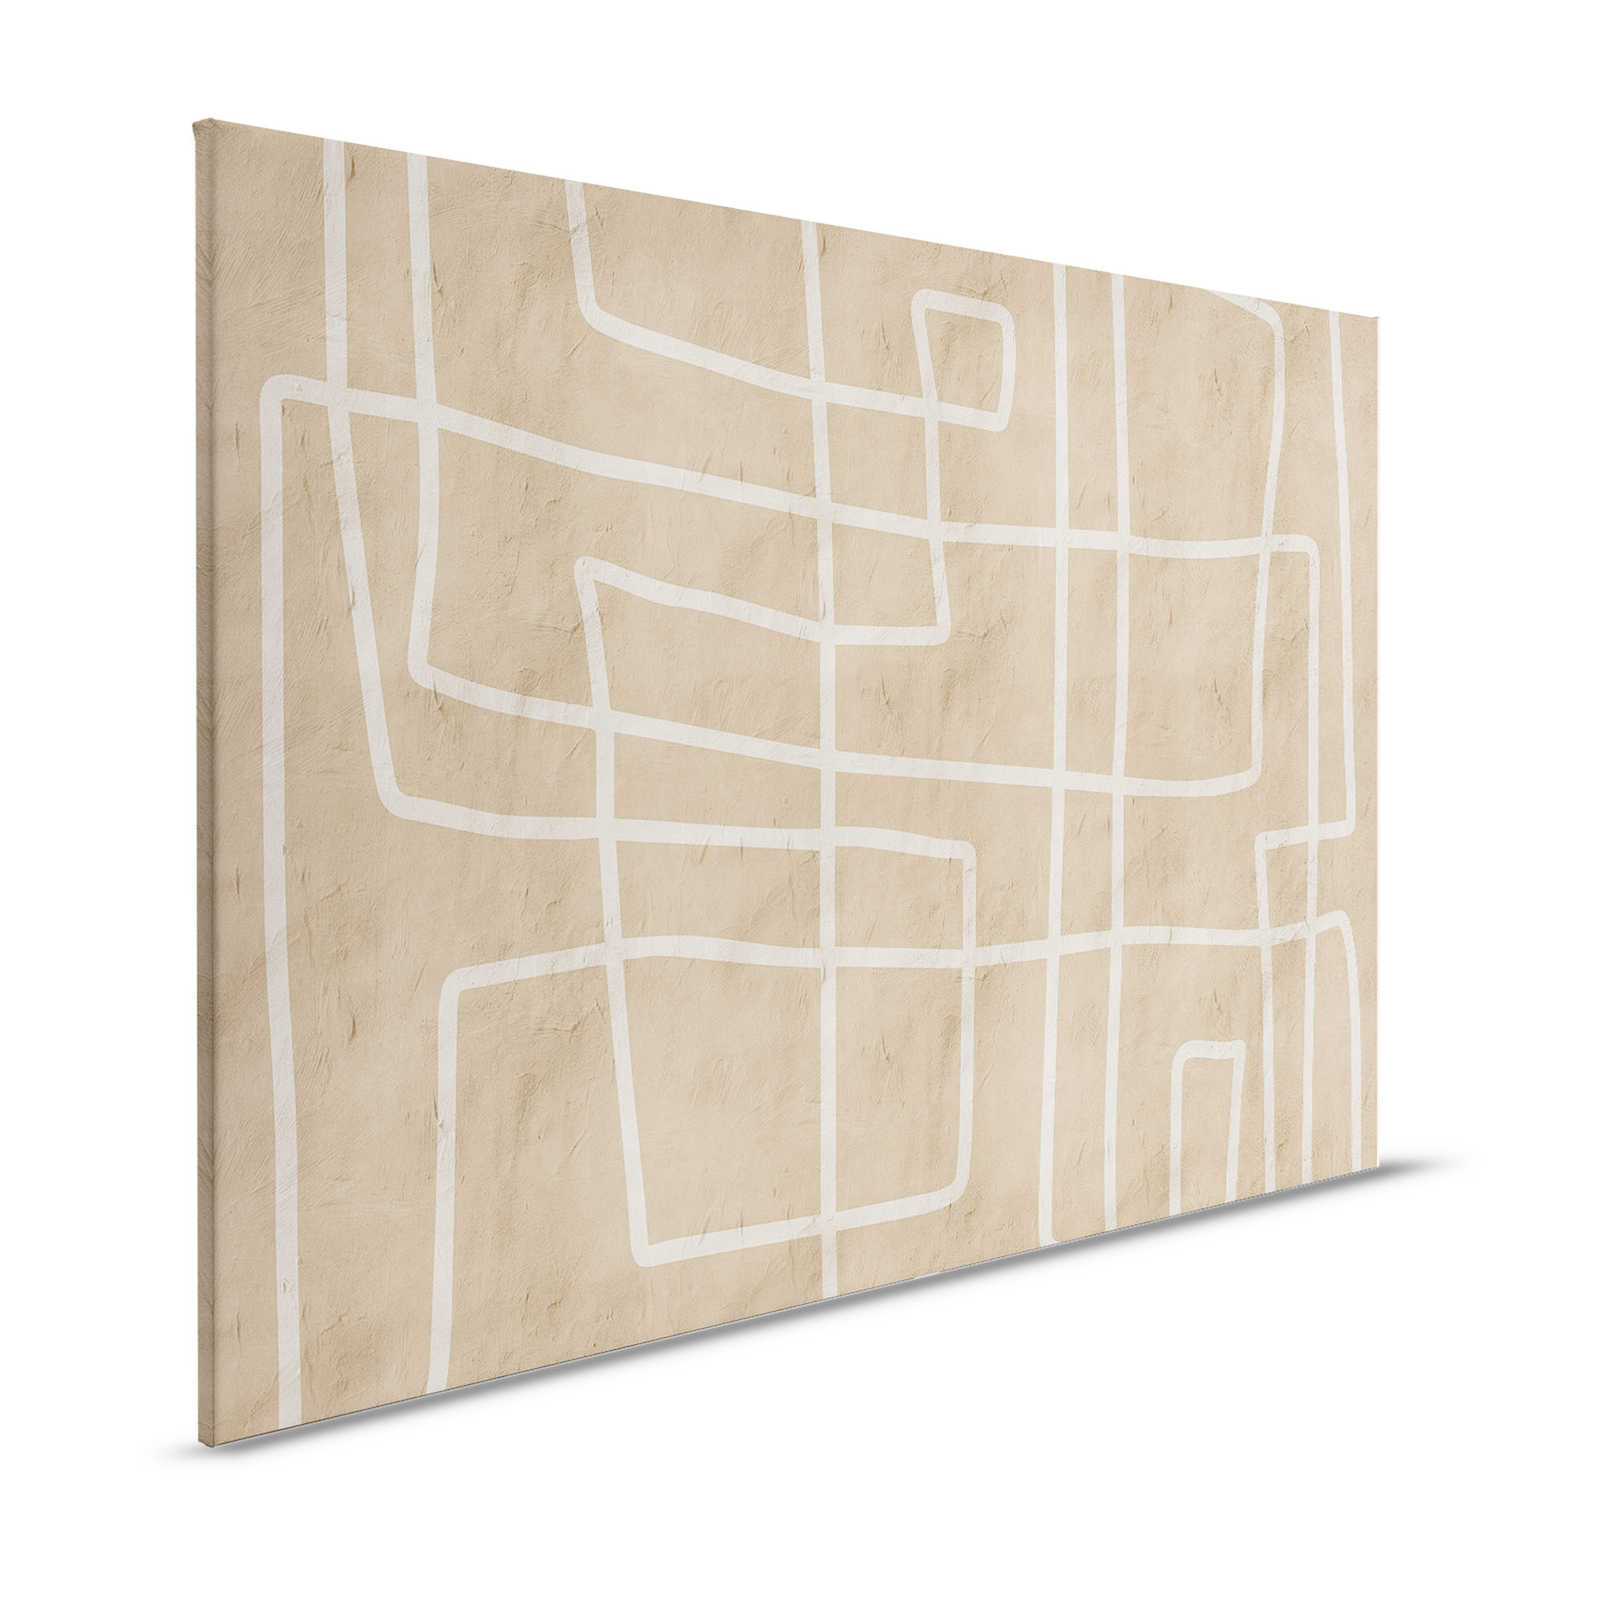 Serengeti 1 - Clay Wall Canvas Painting with Ethno Line Pattern in Beige - 1.20 m x 0.80 m
